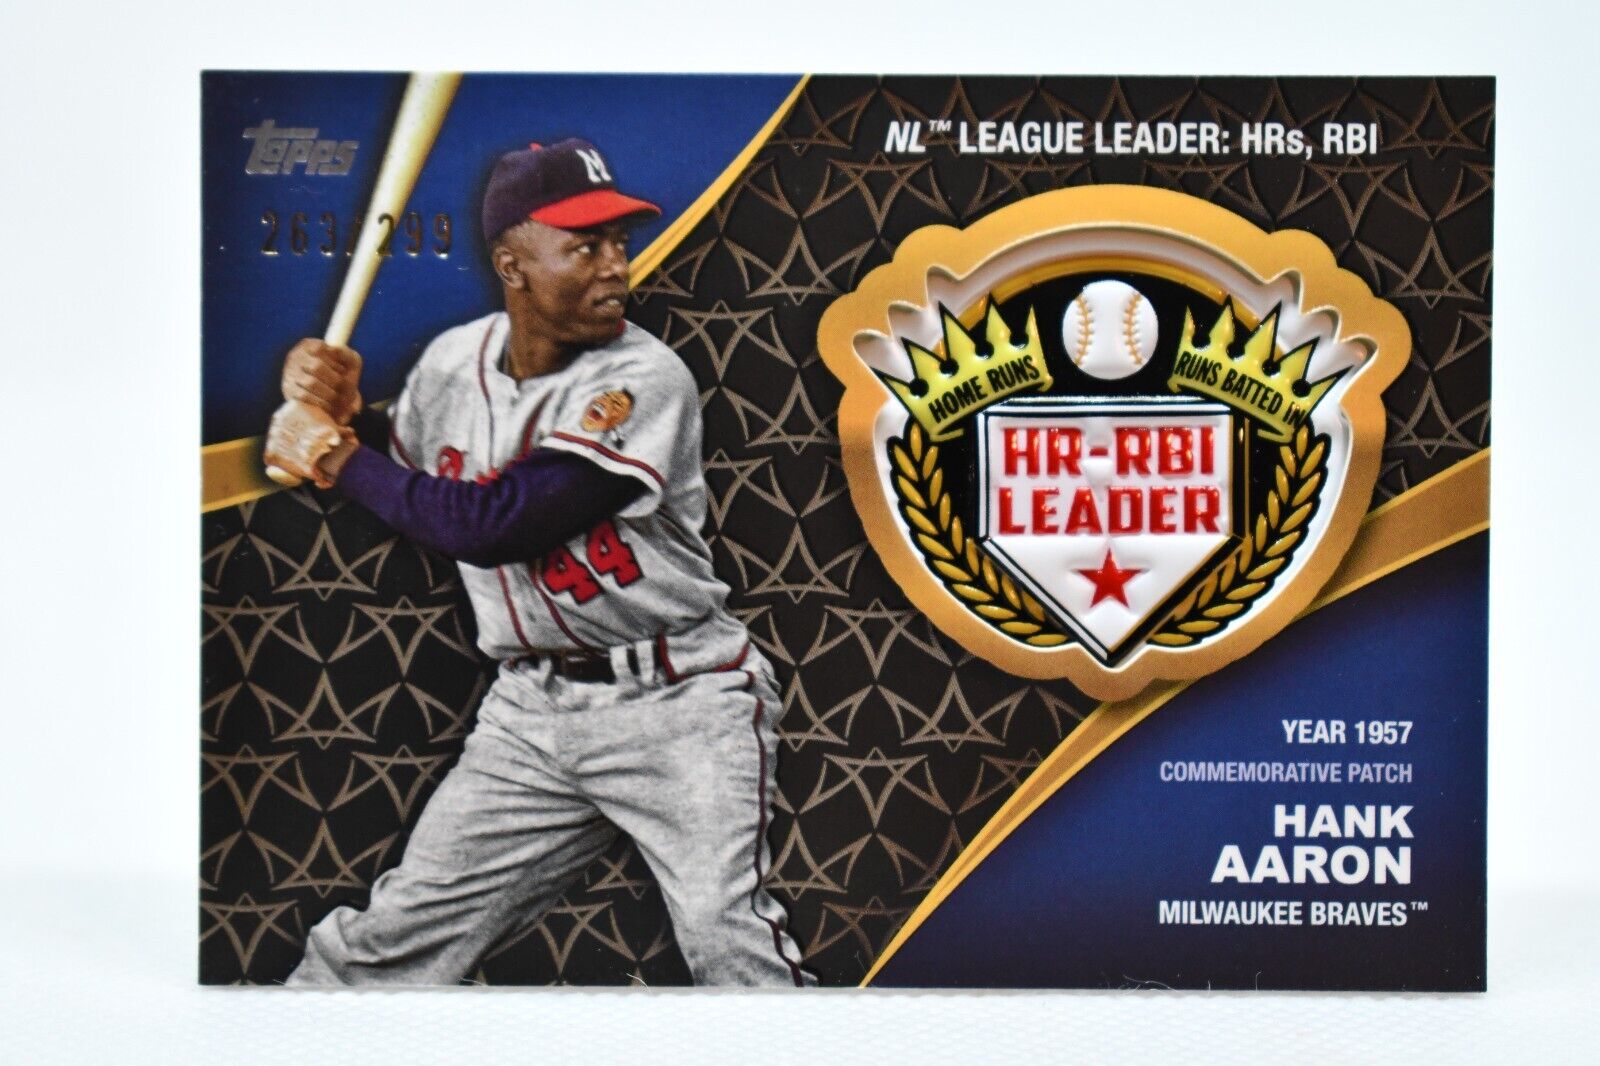 2023 topps series 2 mlm, relics, all star relics and crowning achievenments